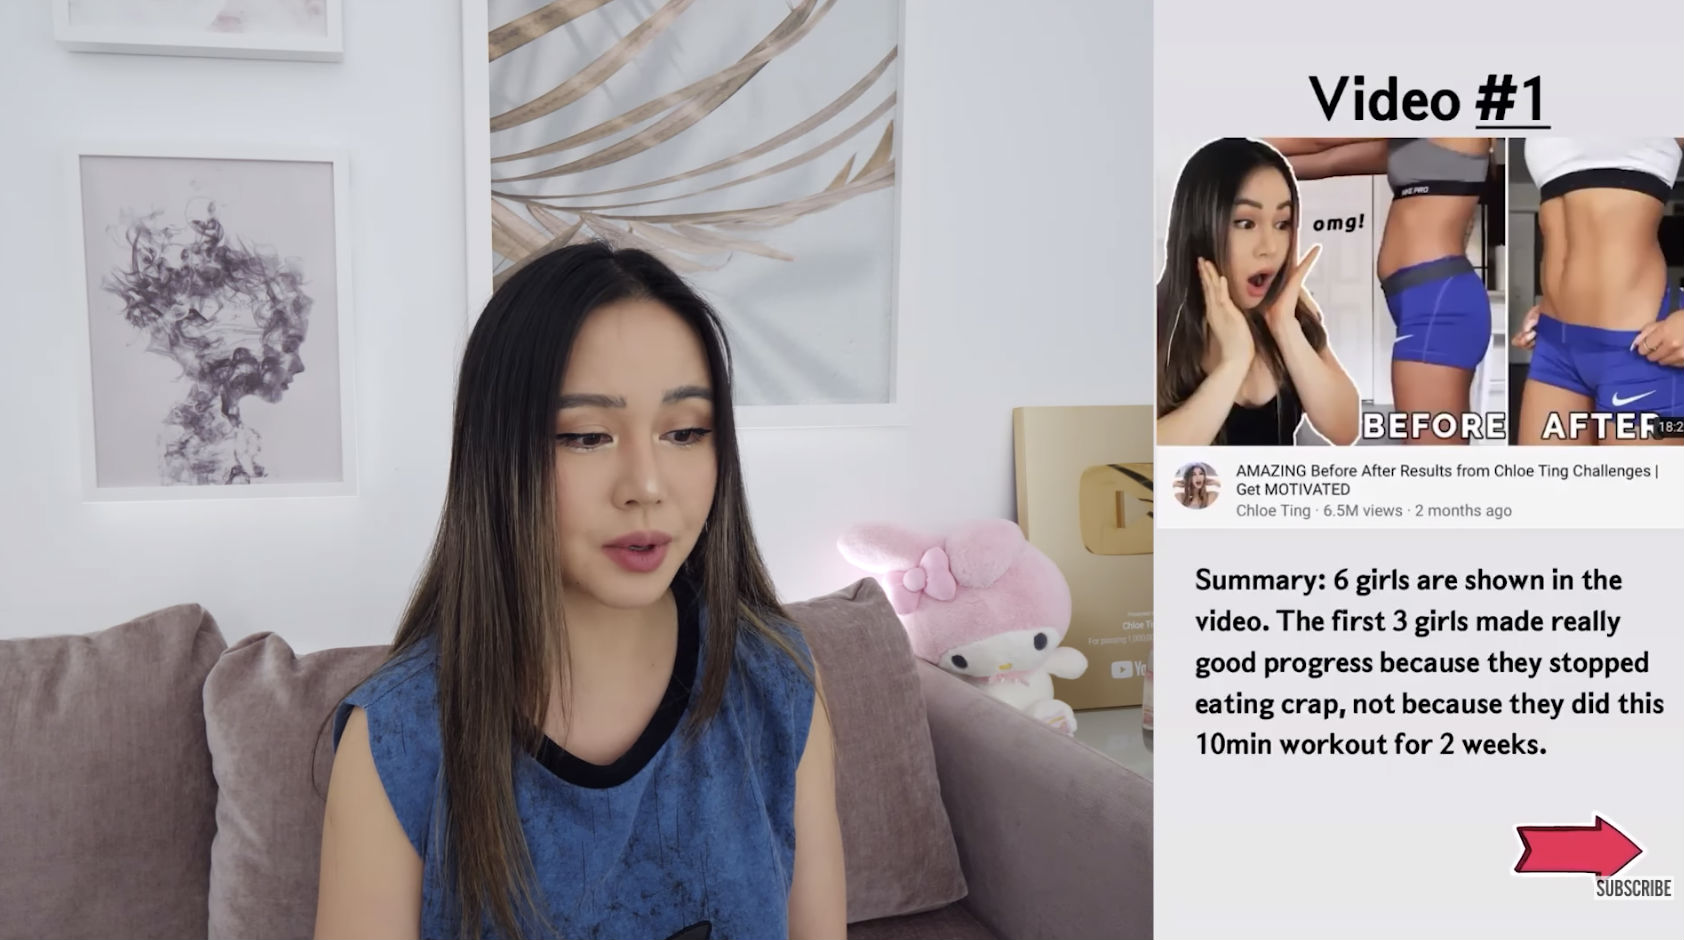 Fitness YouTuber Chloe Ting in a video titled ‘Time to Talk.’ Image: Chloe Ting/YouTube